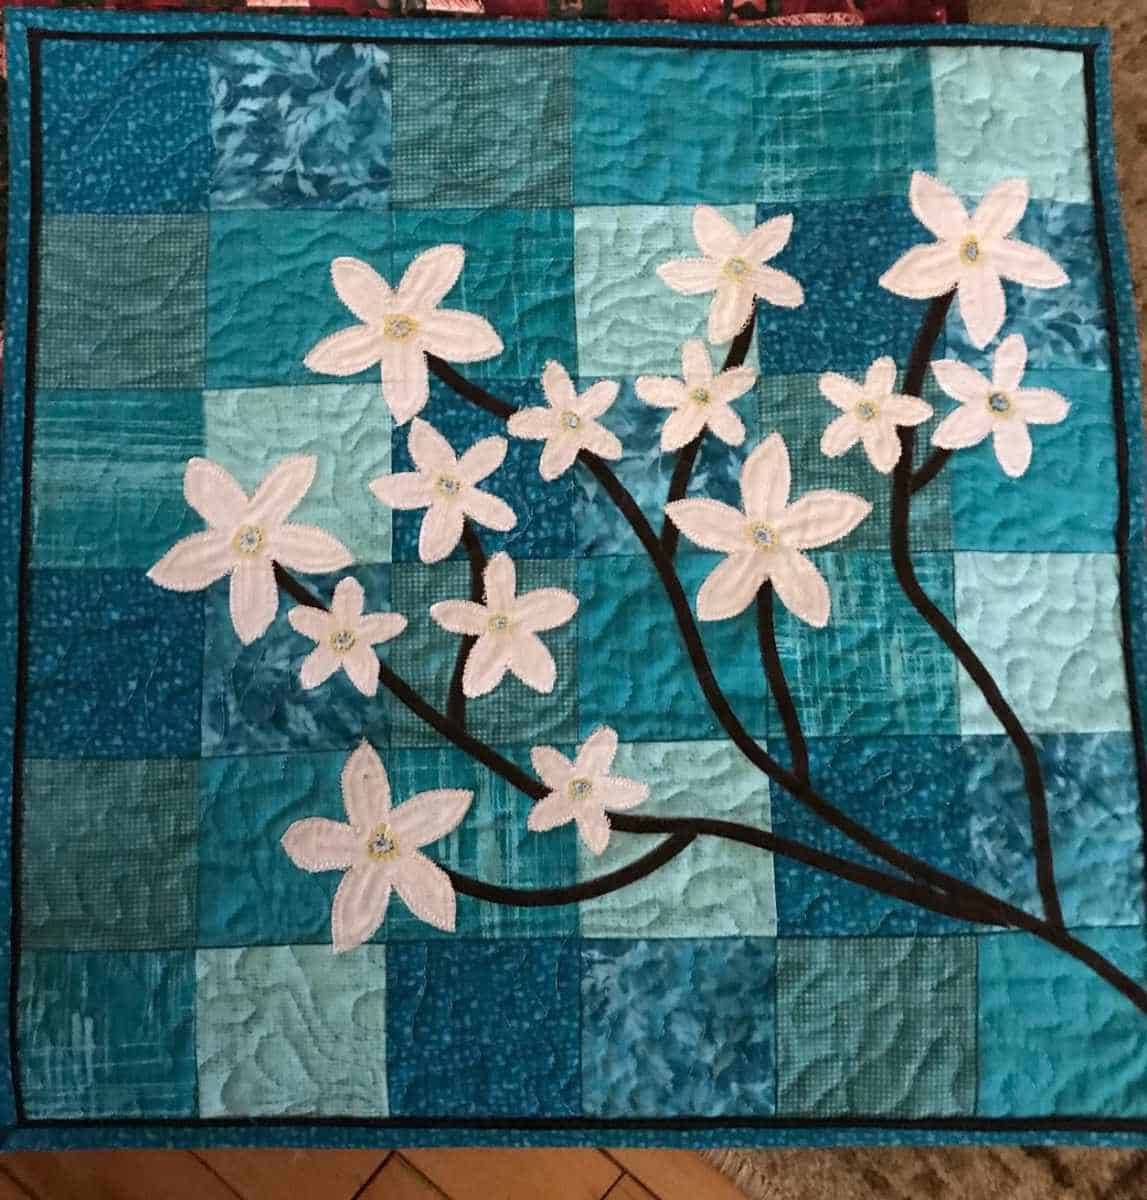 Forget Me Not wall hanging in teal quilt fabrics